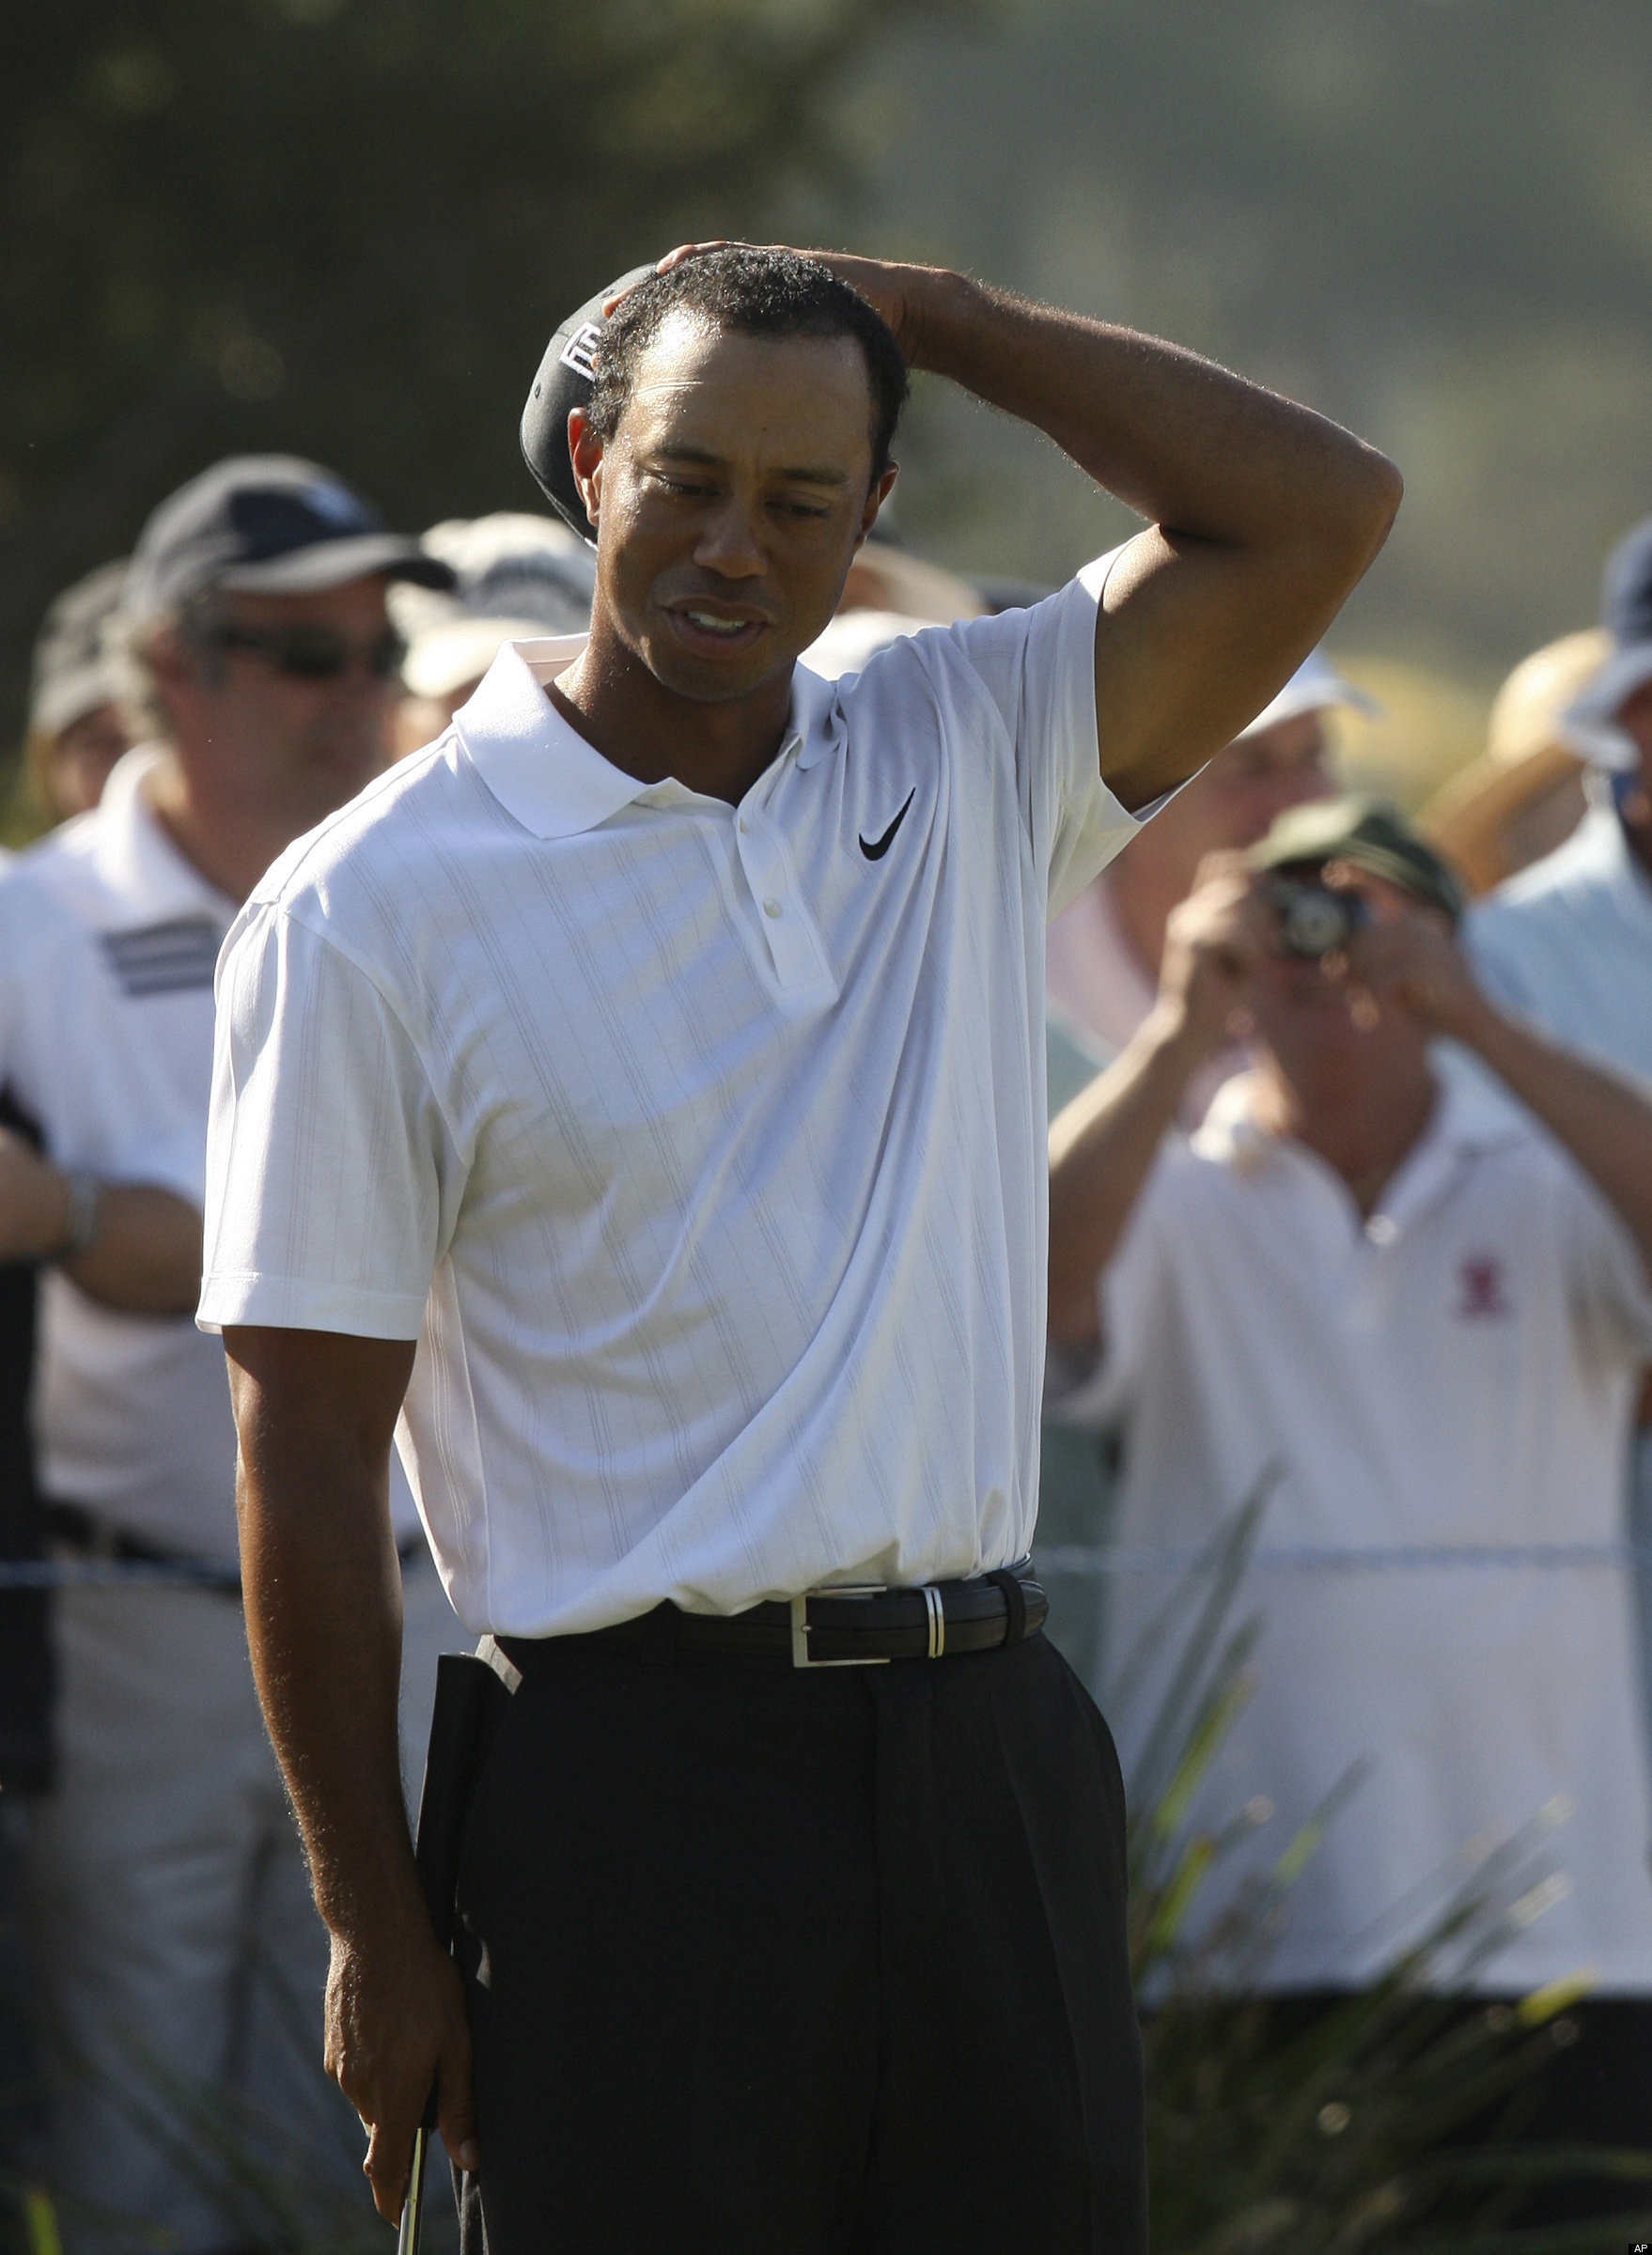 Tiger woods nude wife pic - Adult gallery.